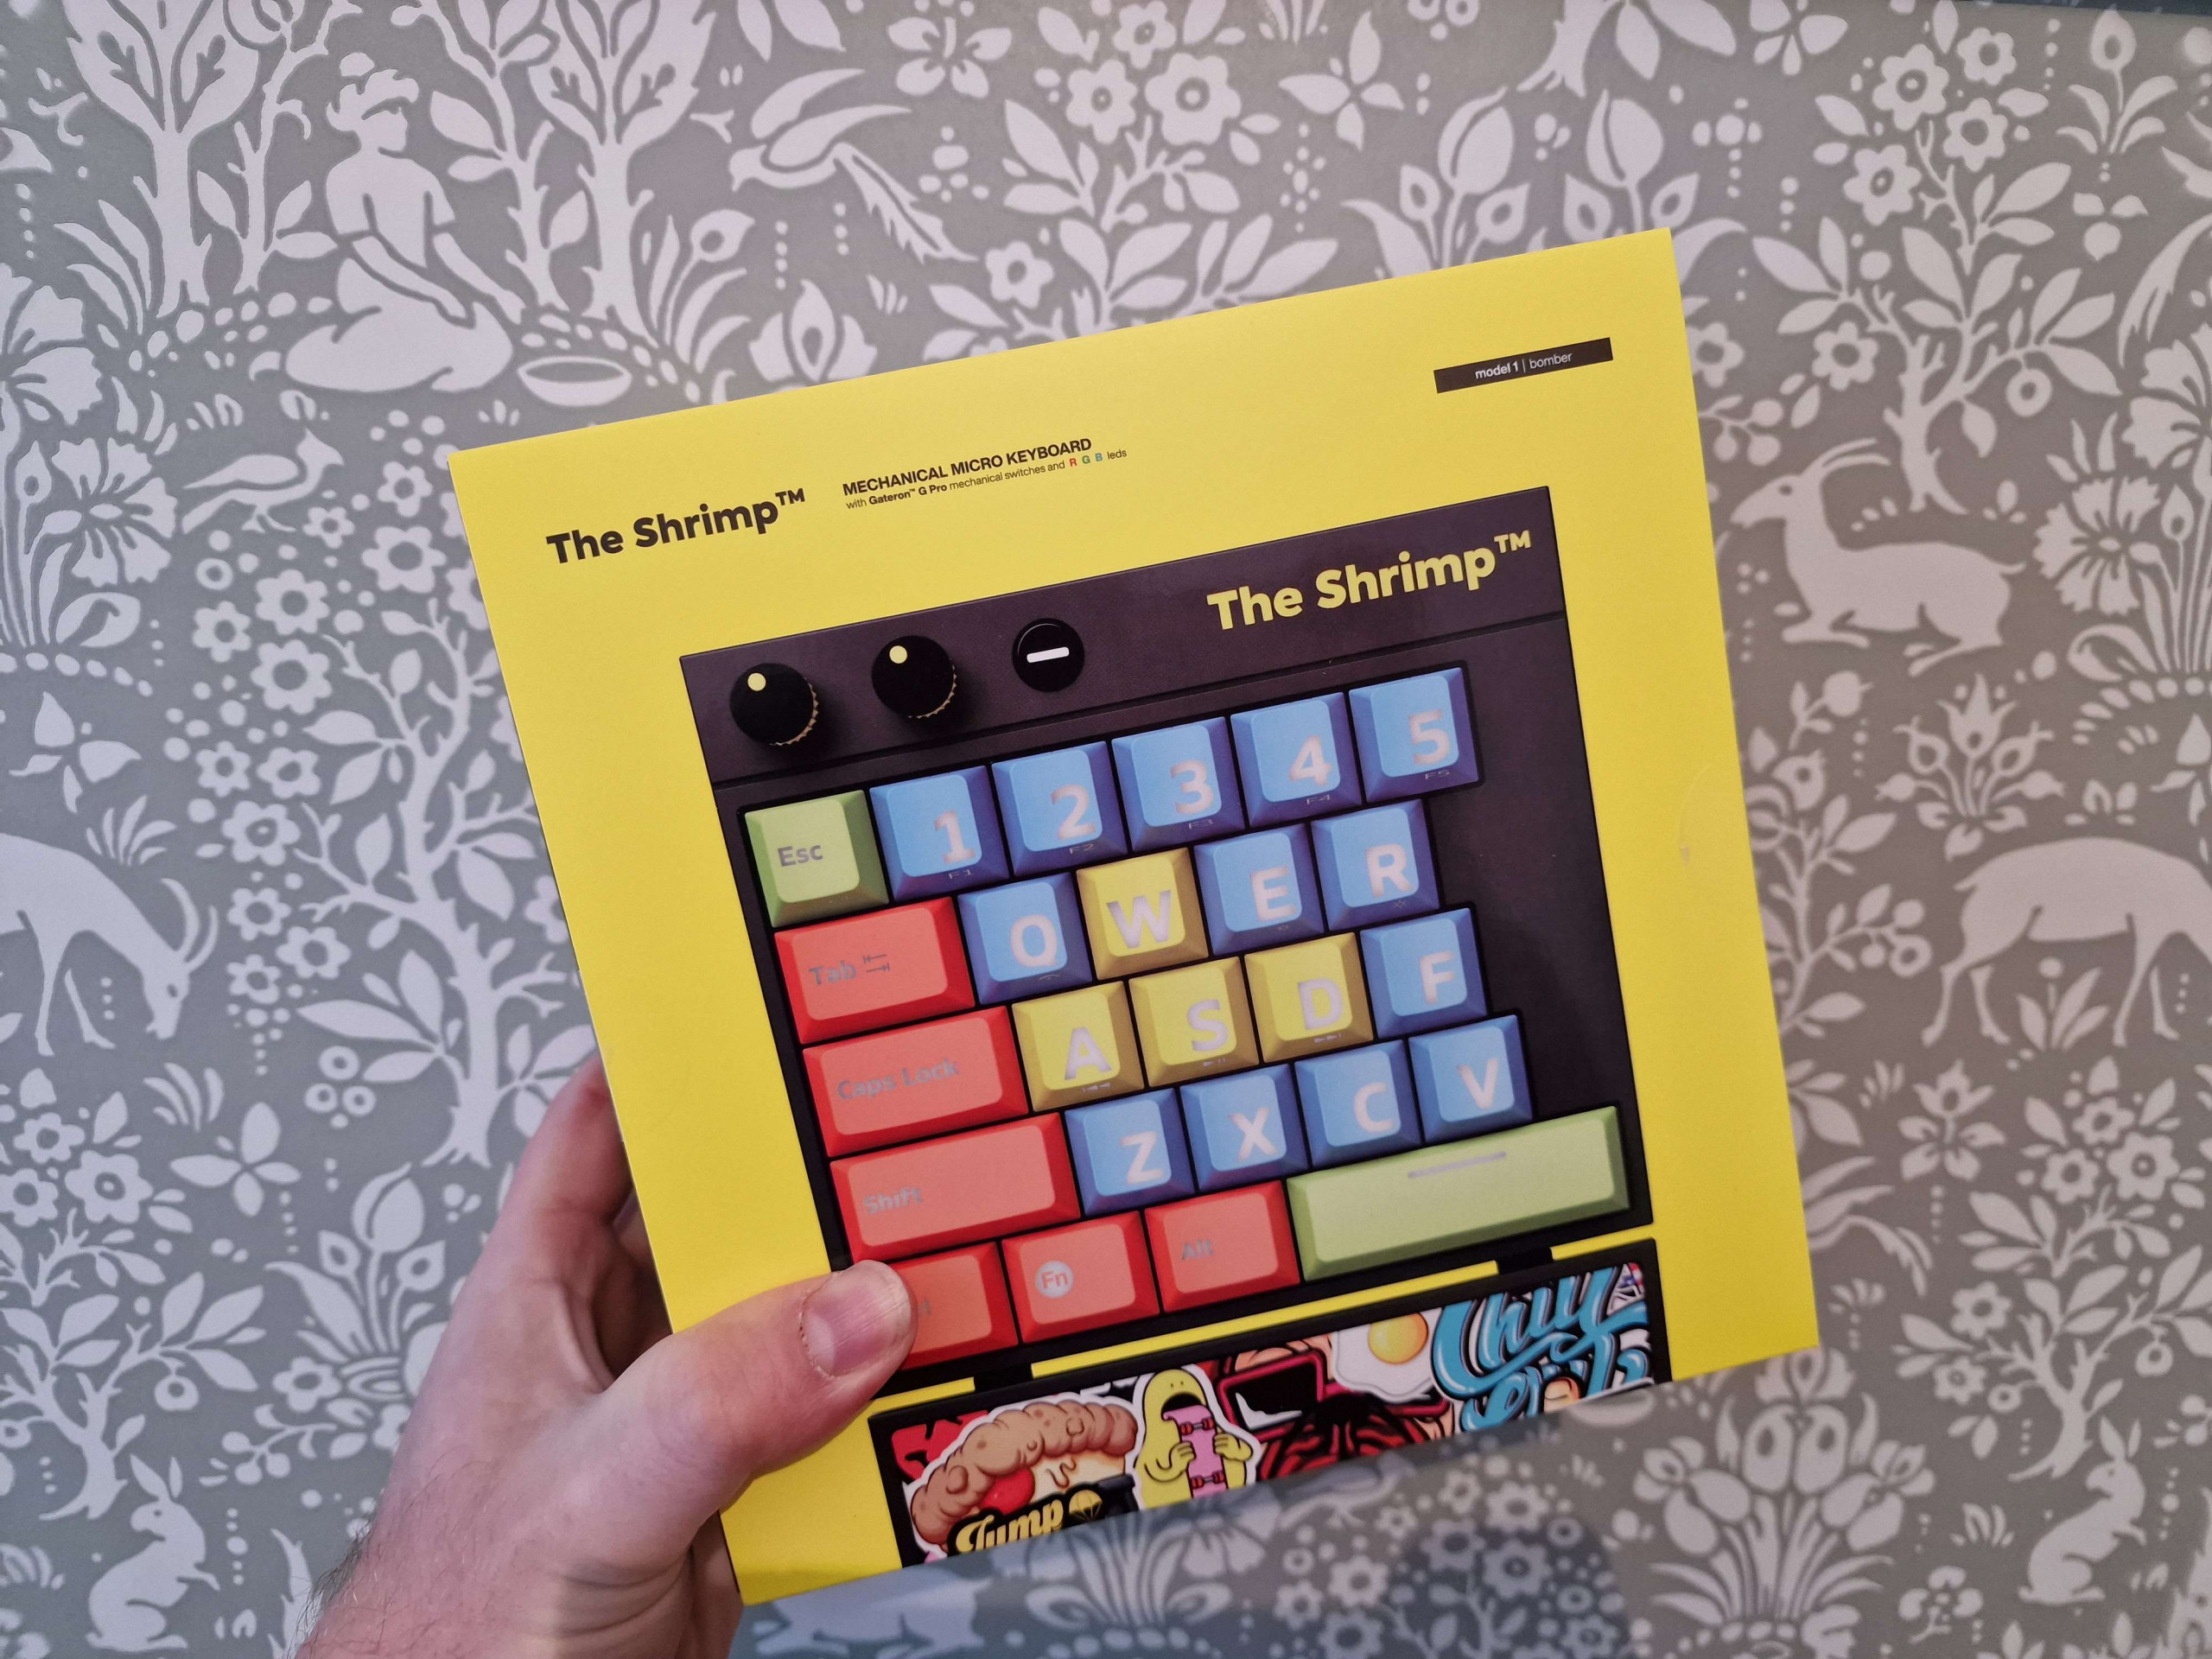 The colourful yellow box showing The Shrimp keyboard 